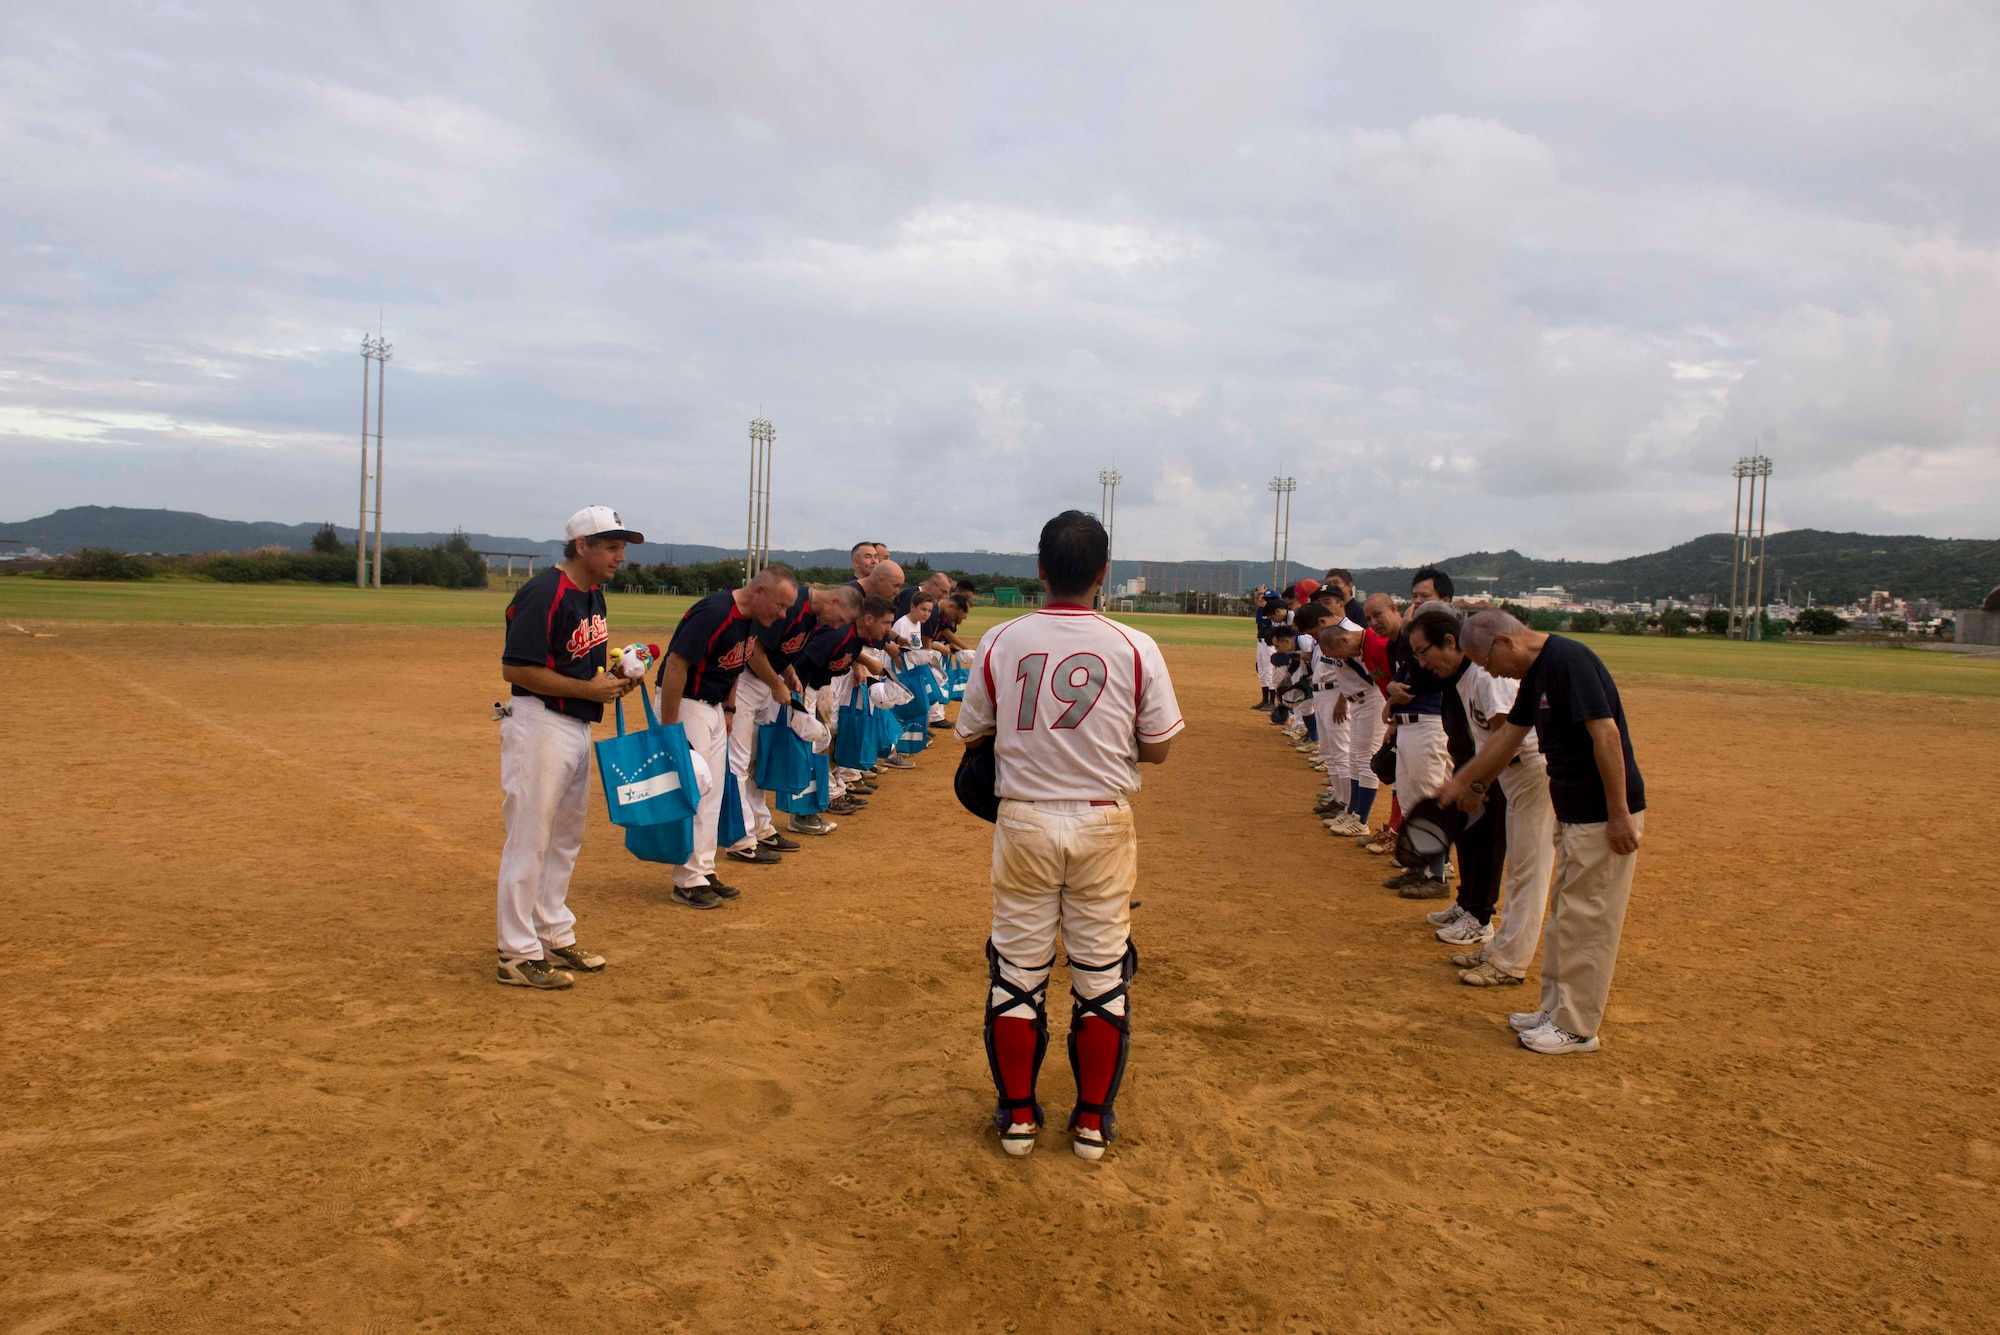 Members of the U.S. Consulate Allstars and Okinawa Prefectural Government Baseball Teams bow to each other after a baseball game Nov. 19, 2016, at a baseball field in  Naha, Japan. The Allstars play games against teams on Okinawa to make friends and foster partnerships in the local community. (U.S. Air Force photo by Senior Airman Omari Bernard/Released)xxx